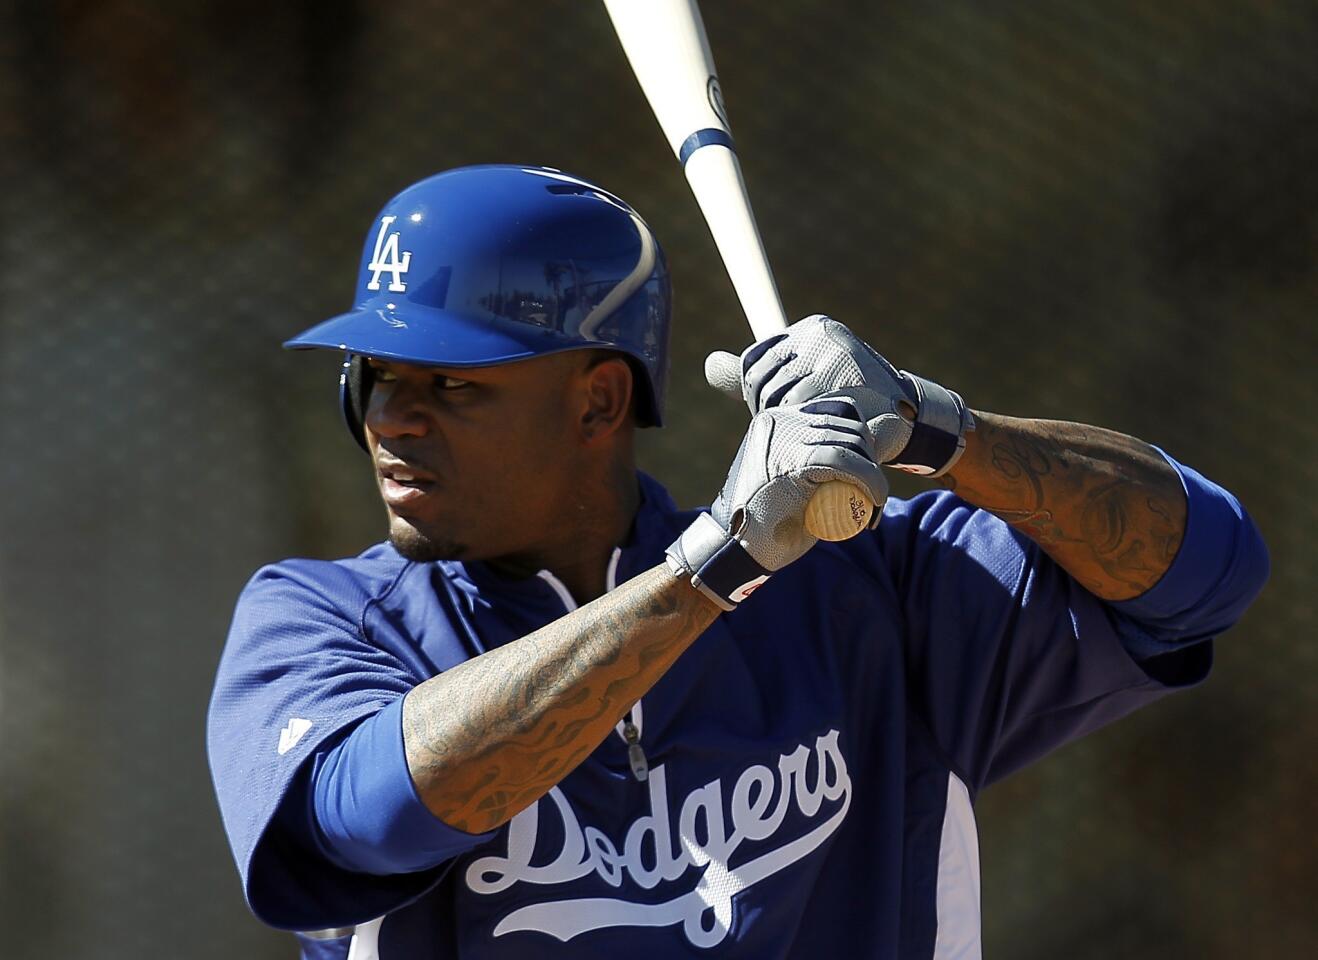 Left fielder Carl Crawford, coming off an injury that sidelined him nearly all of last season, is another of the Dodgers' $20-million earners this season.